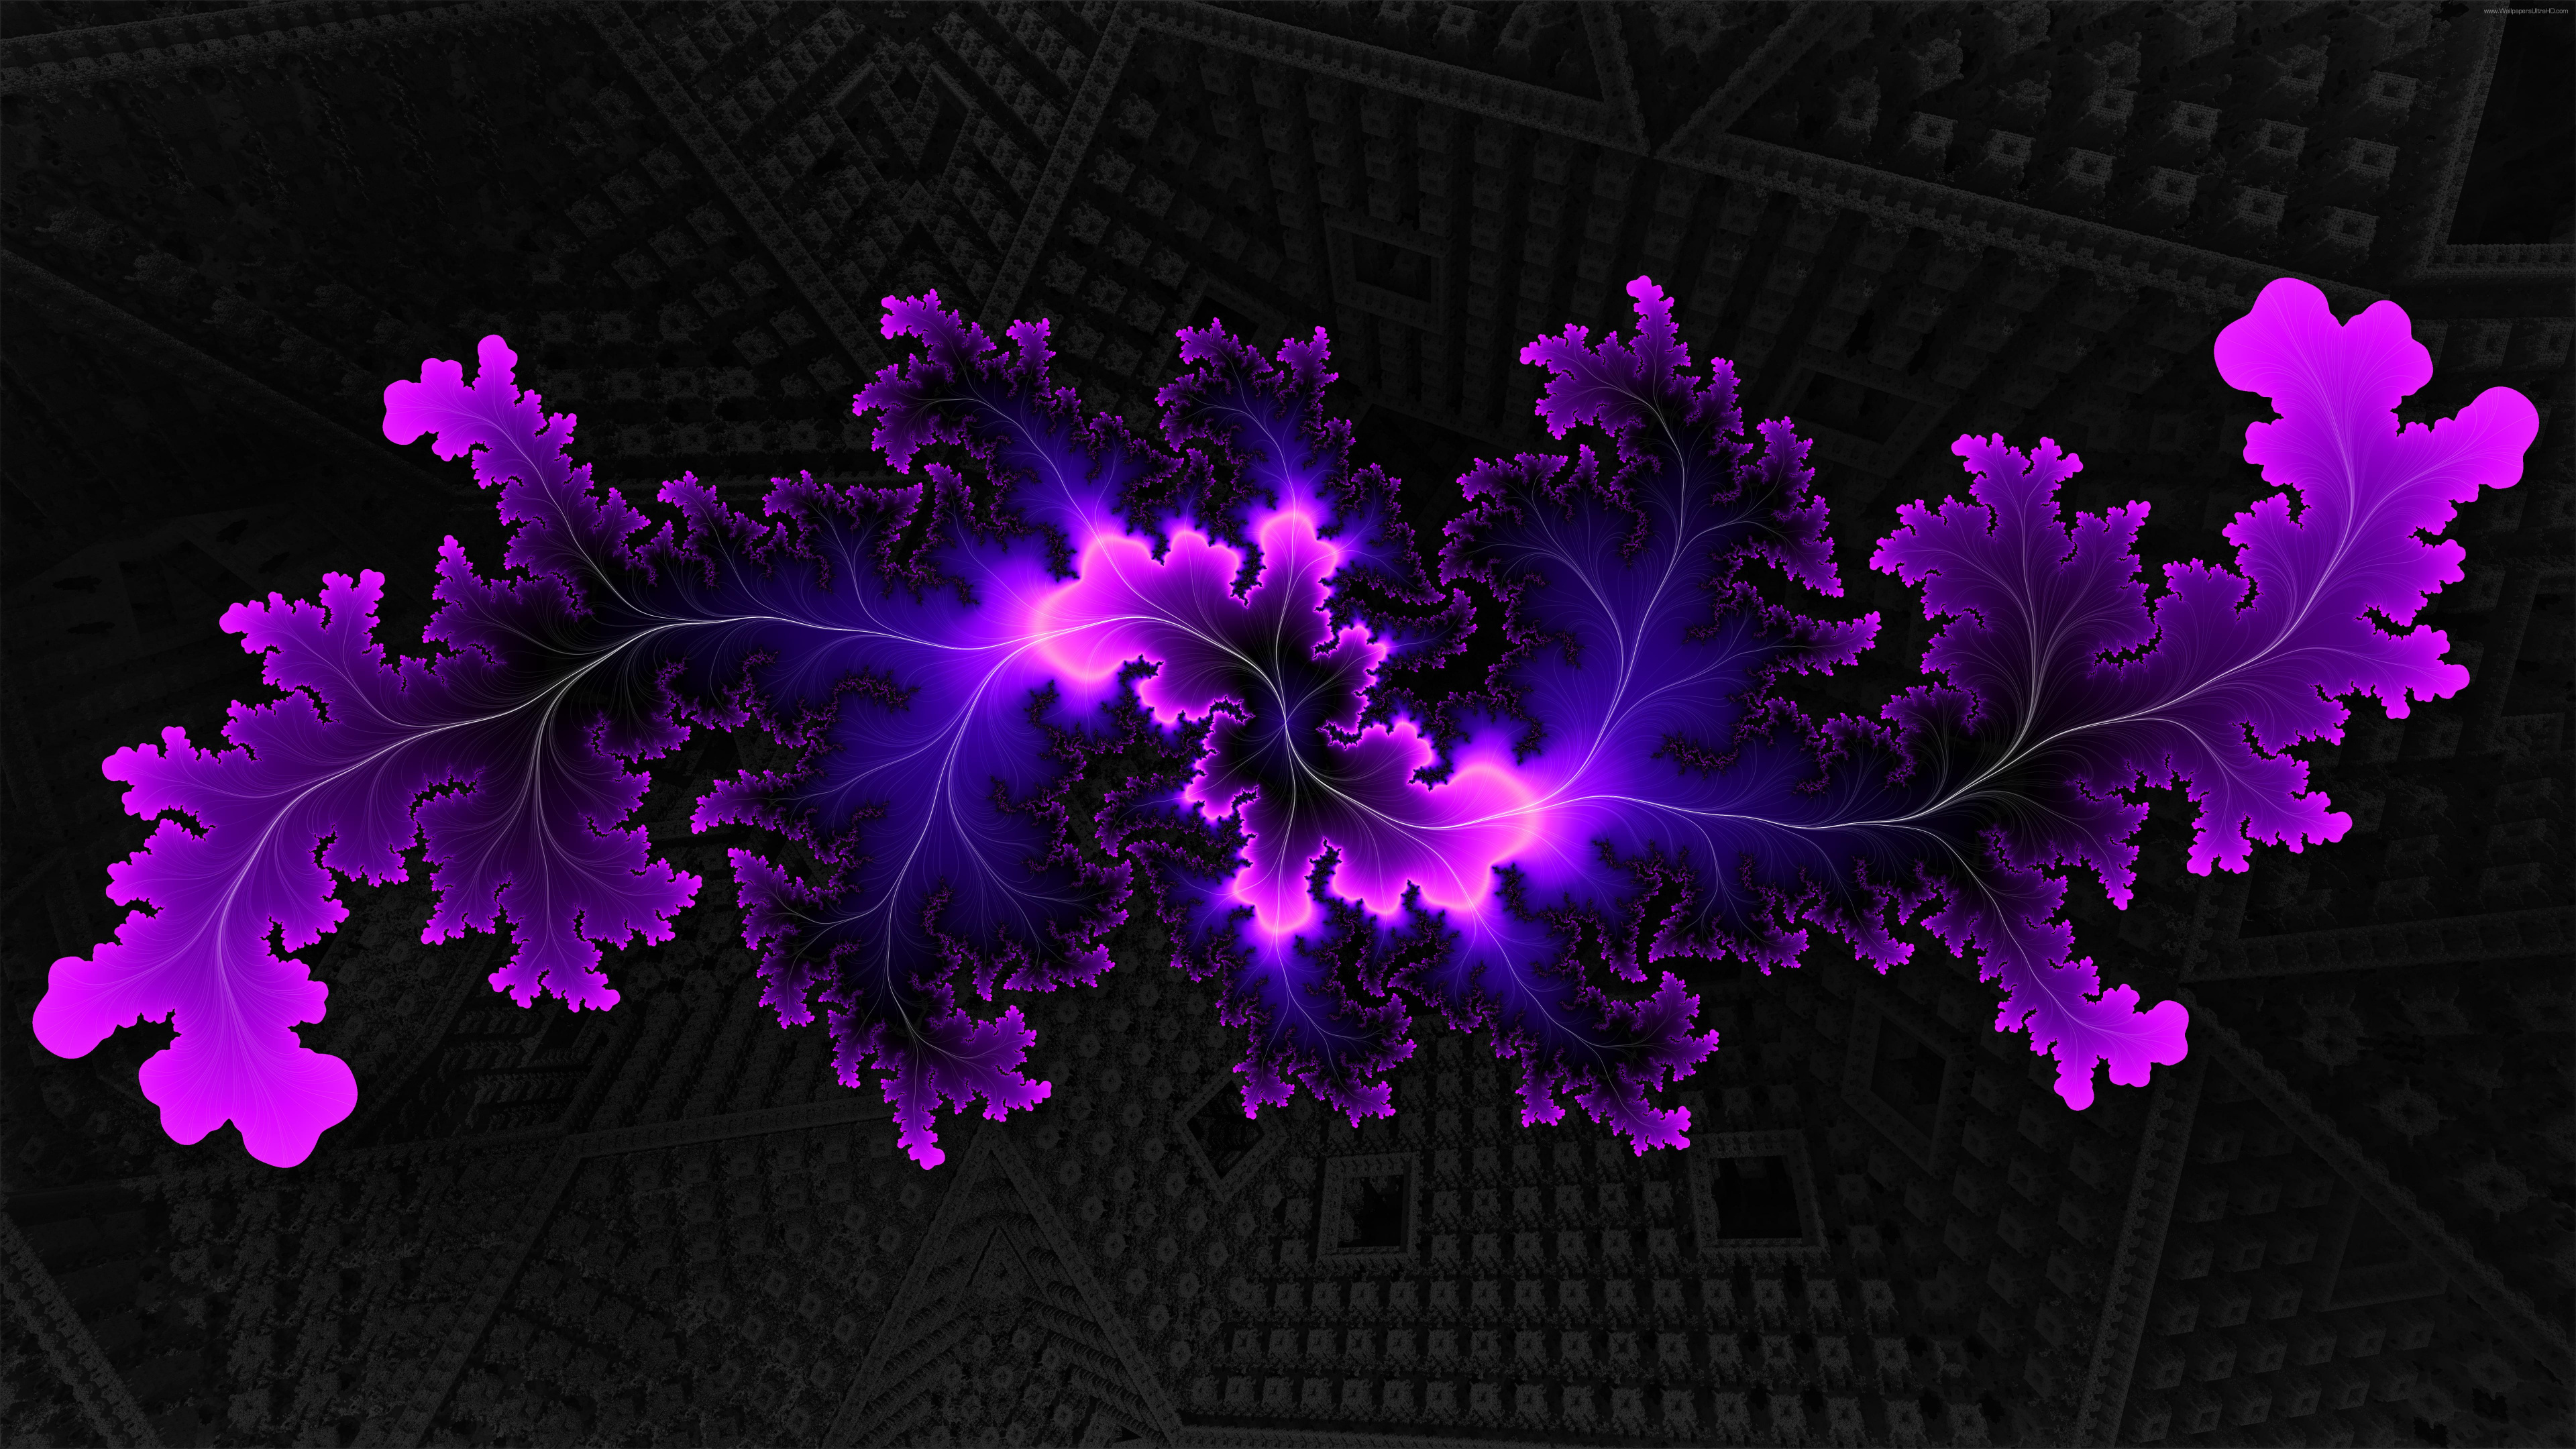 Purple Flower Petals on Black and White Textile. Wallpaper in 3840x2160 Resolution